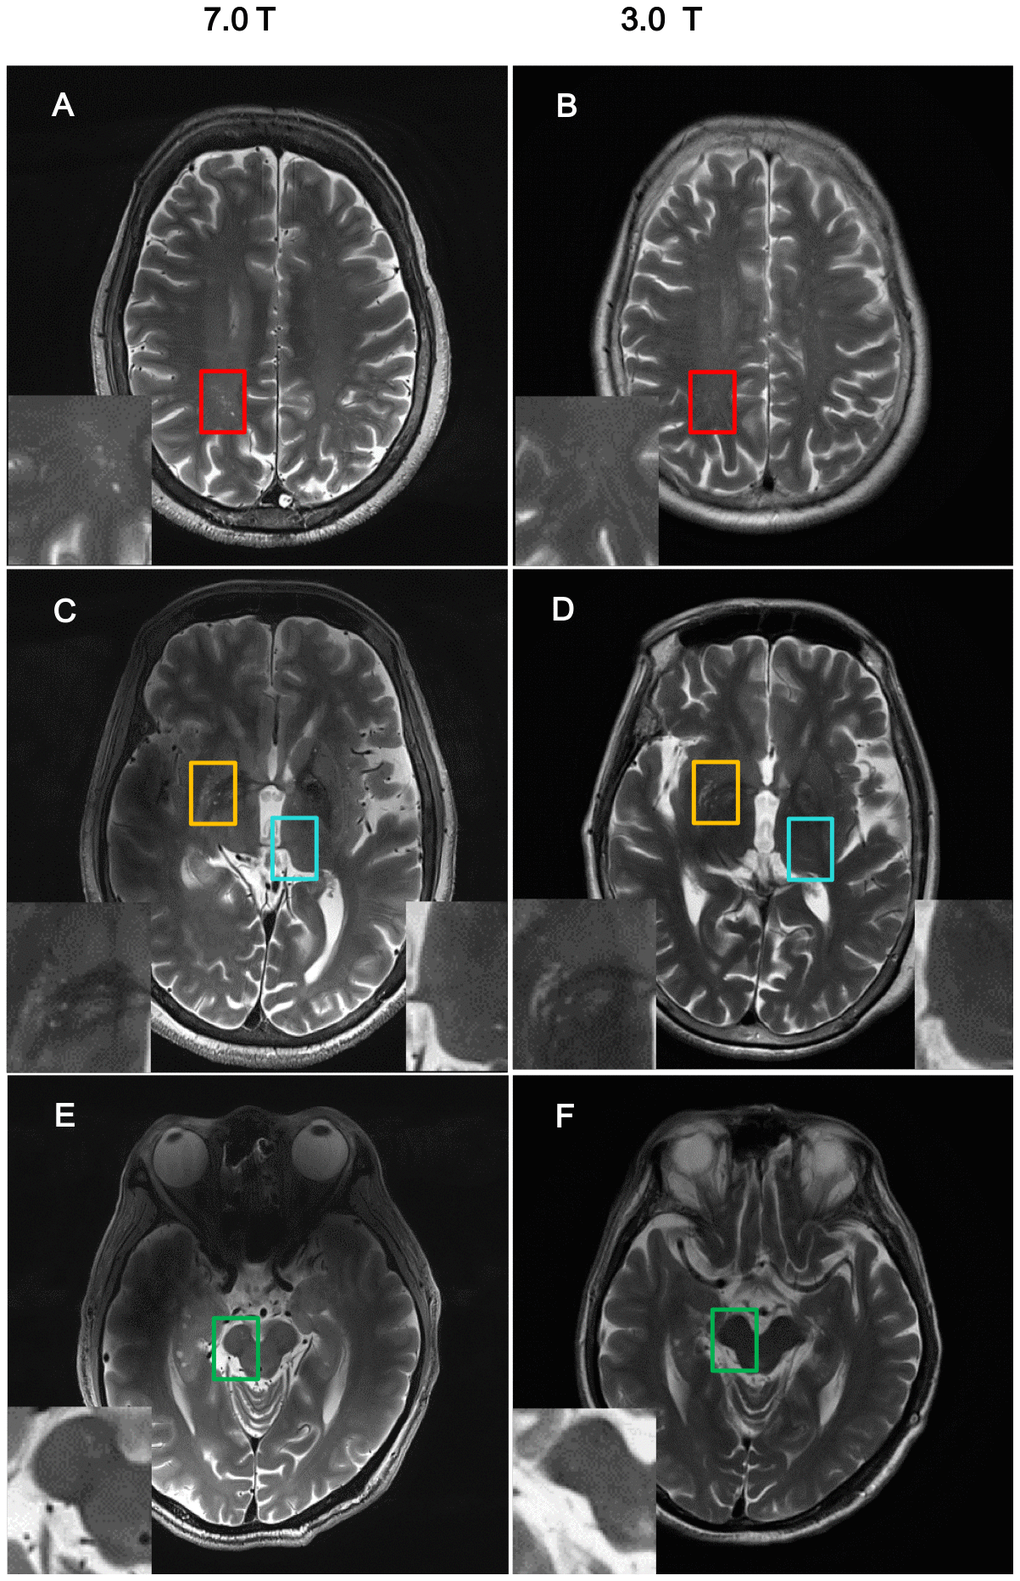 Comparison of imaging resolution between 7T and 3T MRI for nPVS. Example of comparisons of resolution of nPVSs on T2 weighted images acquired by 7.0T MRI vs 3.0T MRI on the same study participant. (A, B) Indicate centrum semiovale with red square; (C, D) indicate yellow squares for basal ganglia and blue squares for thalamus; (E, F) is midbrain with green squares. nPVS, normal-sized perivascular space.